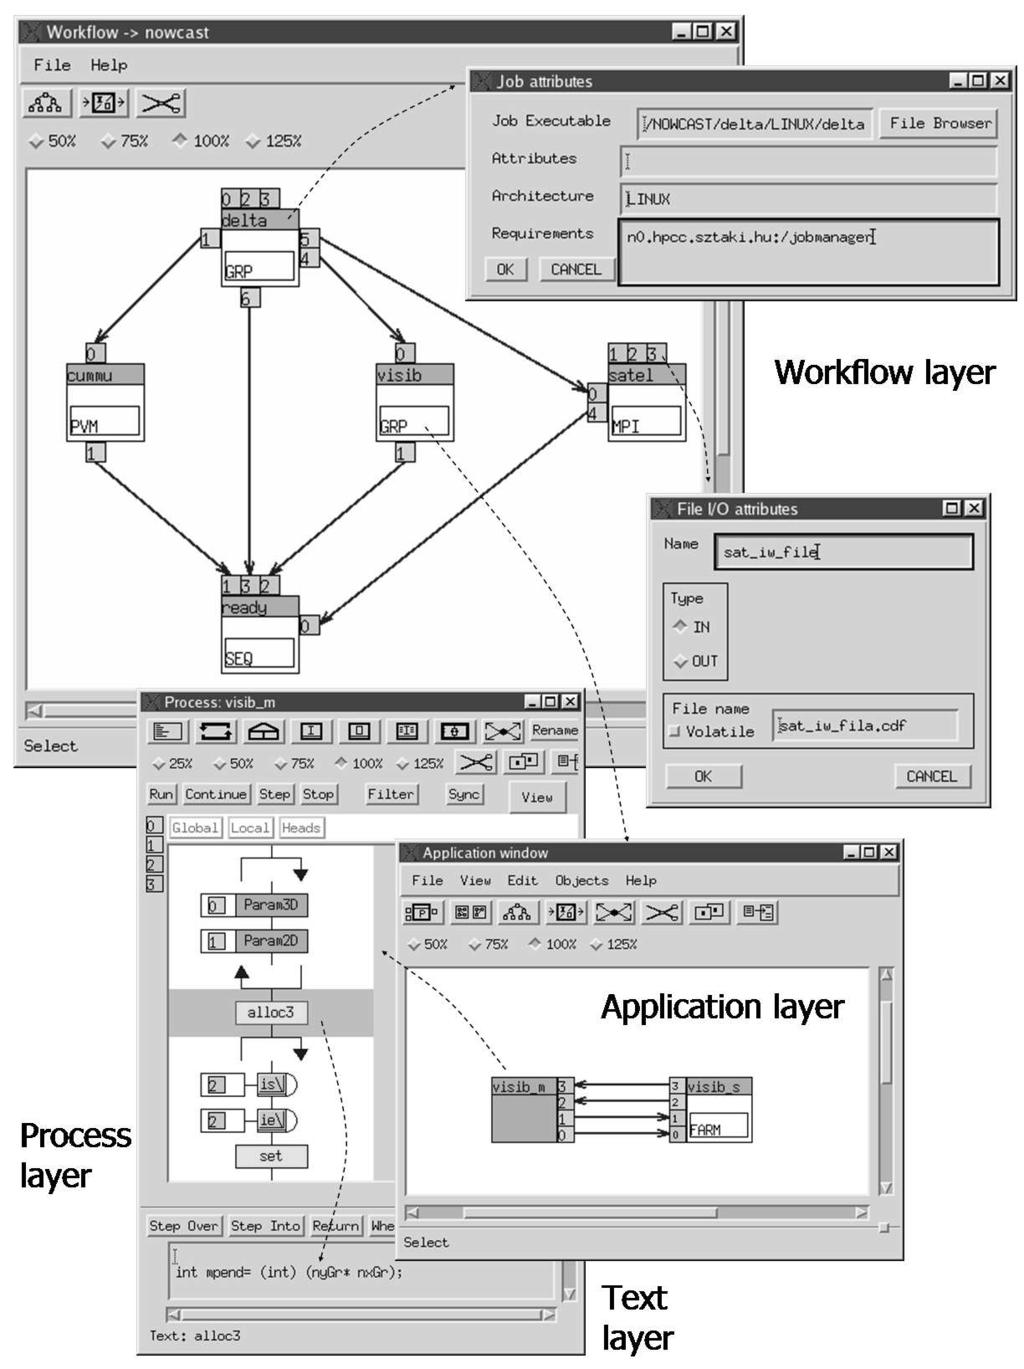 P-GRADE: A Grid Programming Environment 13 As a result, the workflow describes both the control-flow and the data-flow of the application.